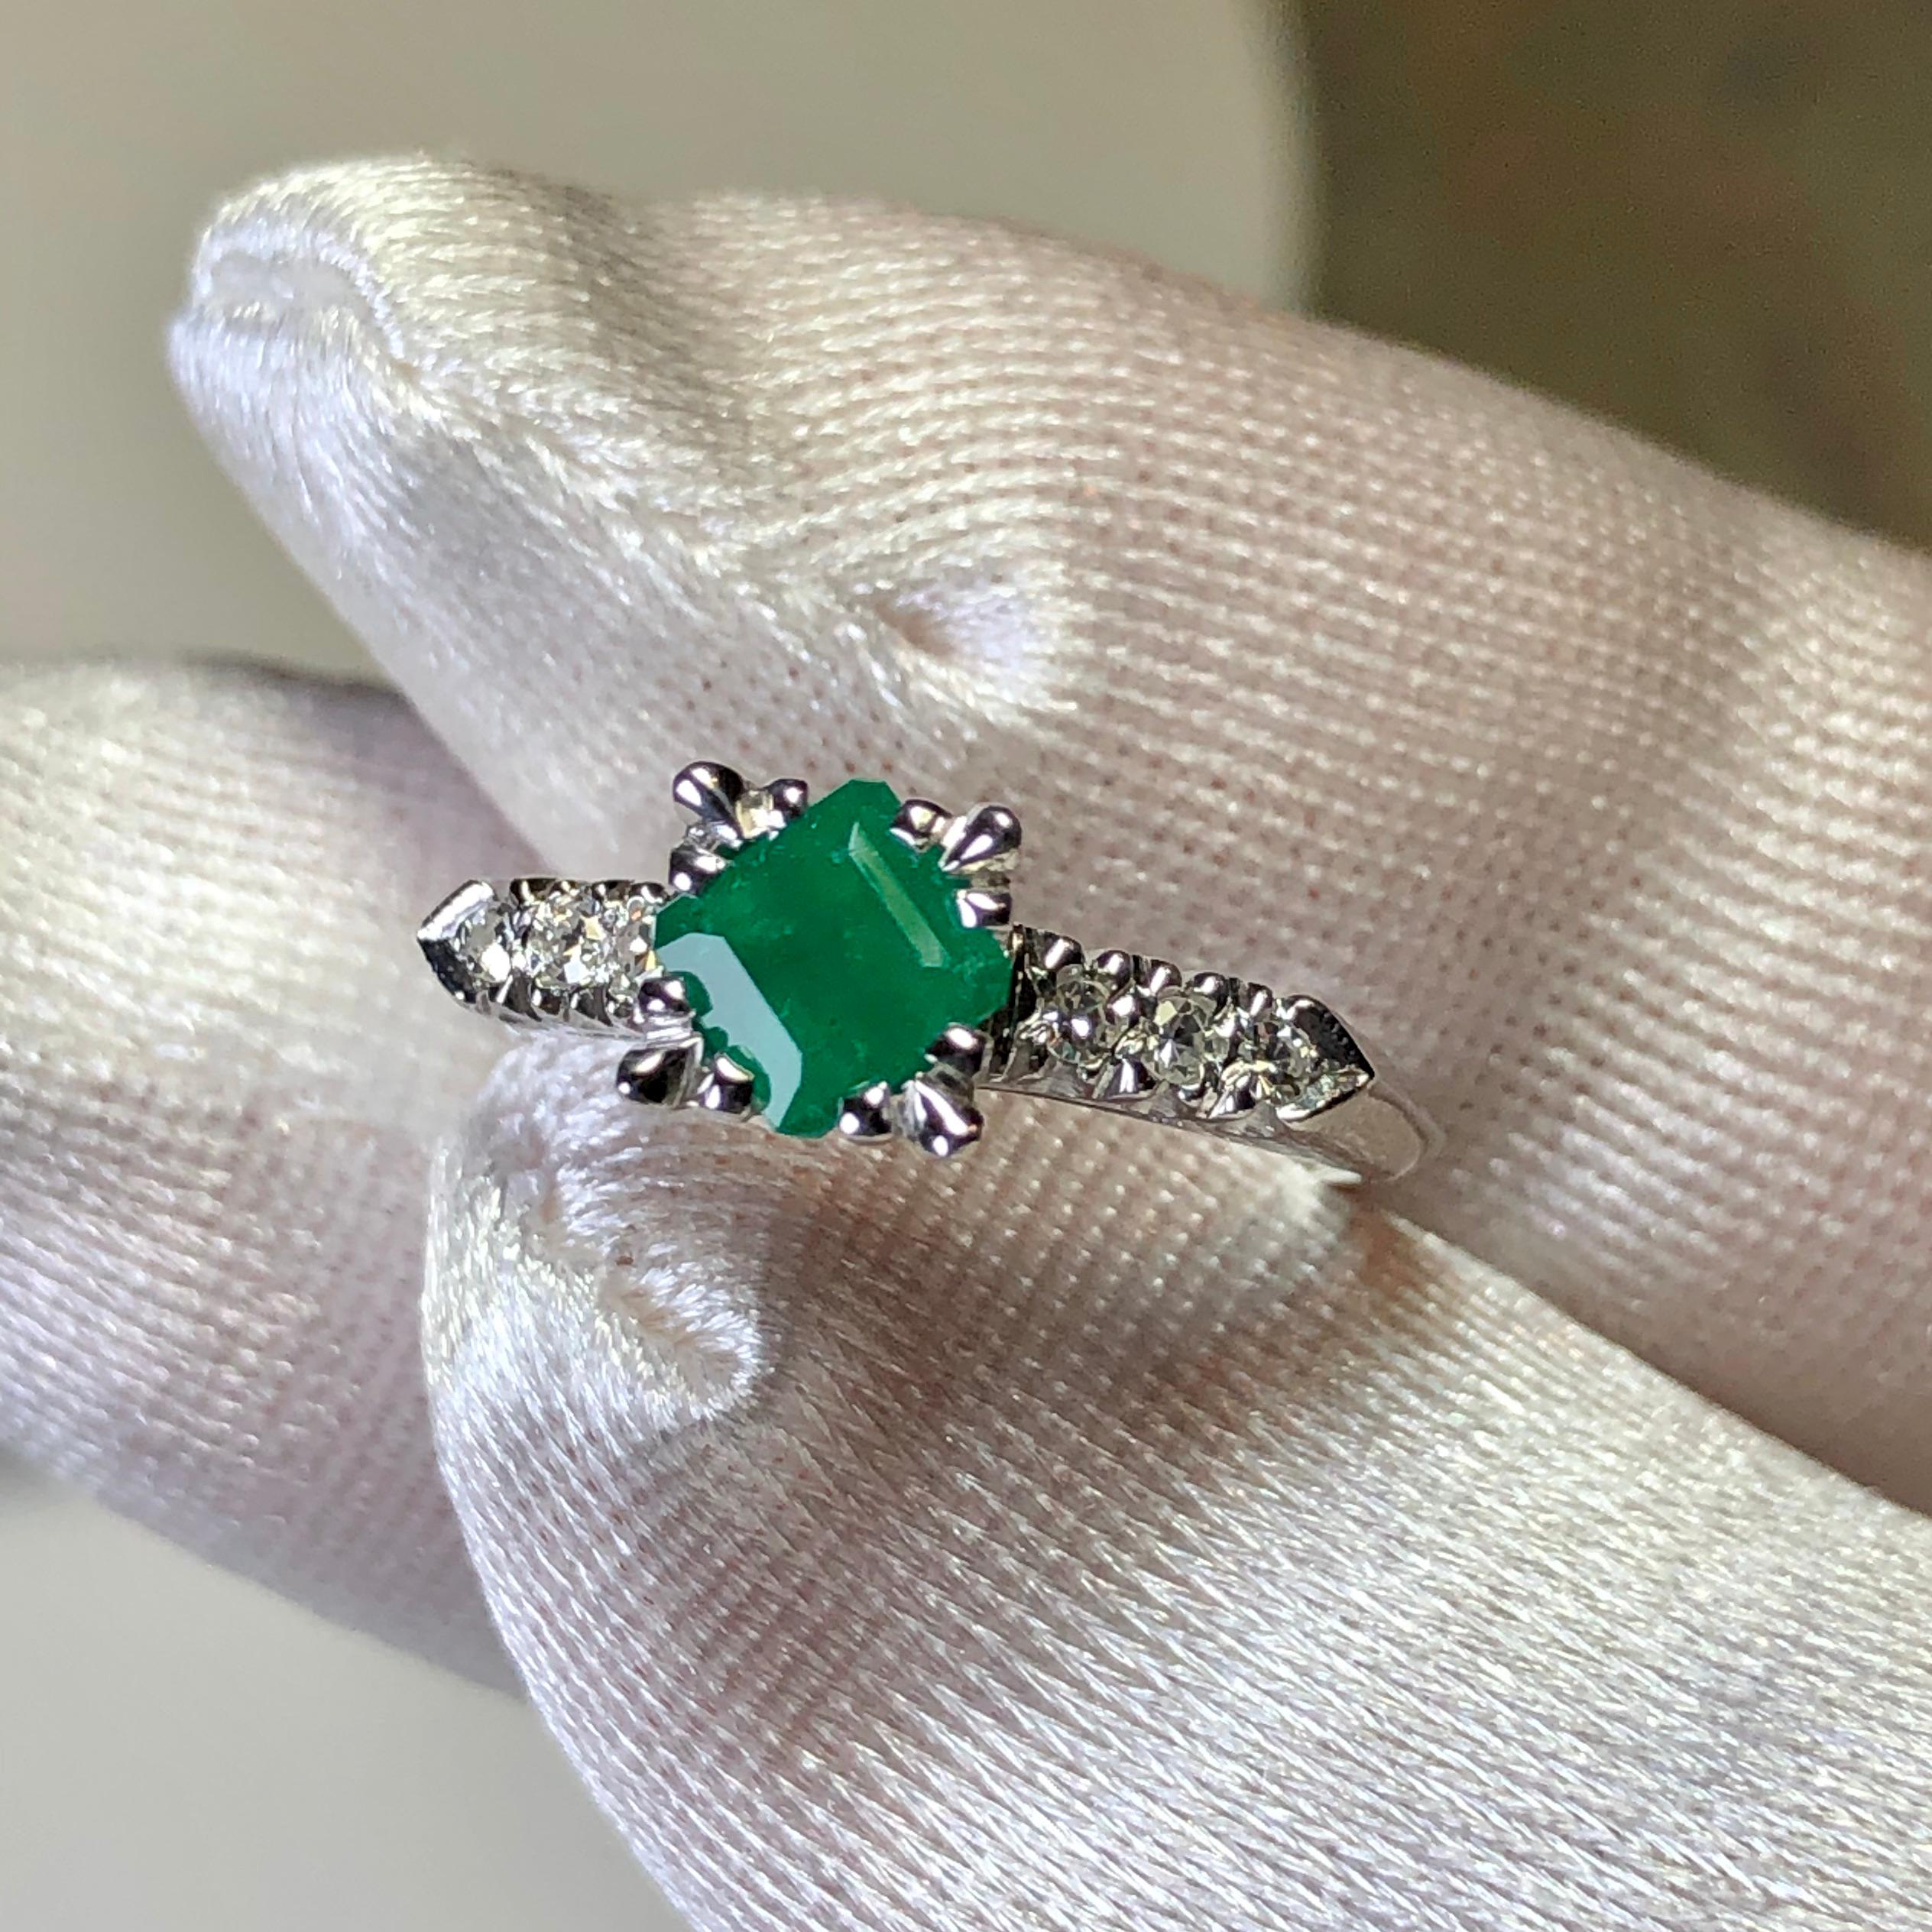 Natural vintage square 0.71 carats Intense deep green Colombian emerald, VS clarity, set in a vintage platinum solitaire engagement ring. Diamond accent approx. 0.20 carats G-SI1.
This gorgeous engagement vintage ring weighs 3.6 Grams. 
Size: 6 and